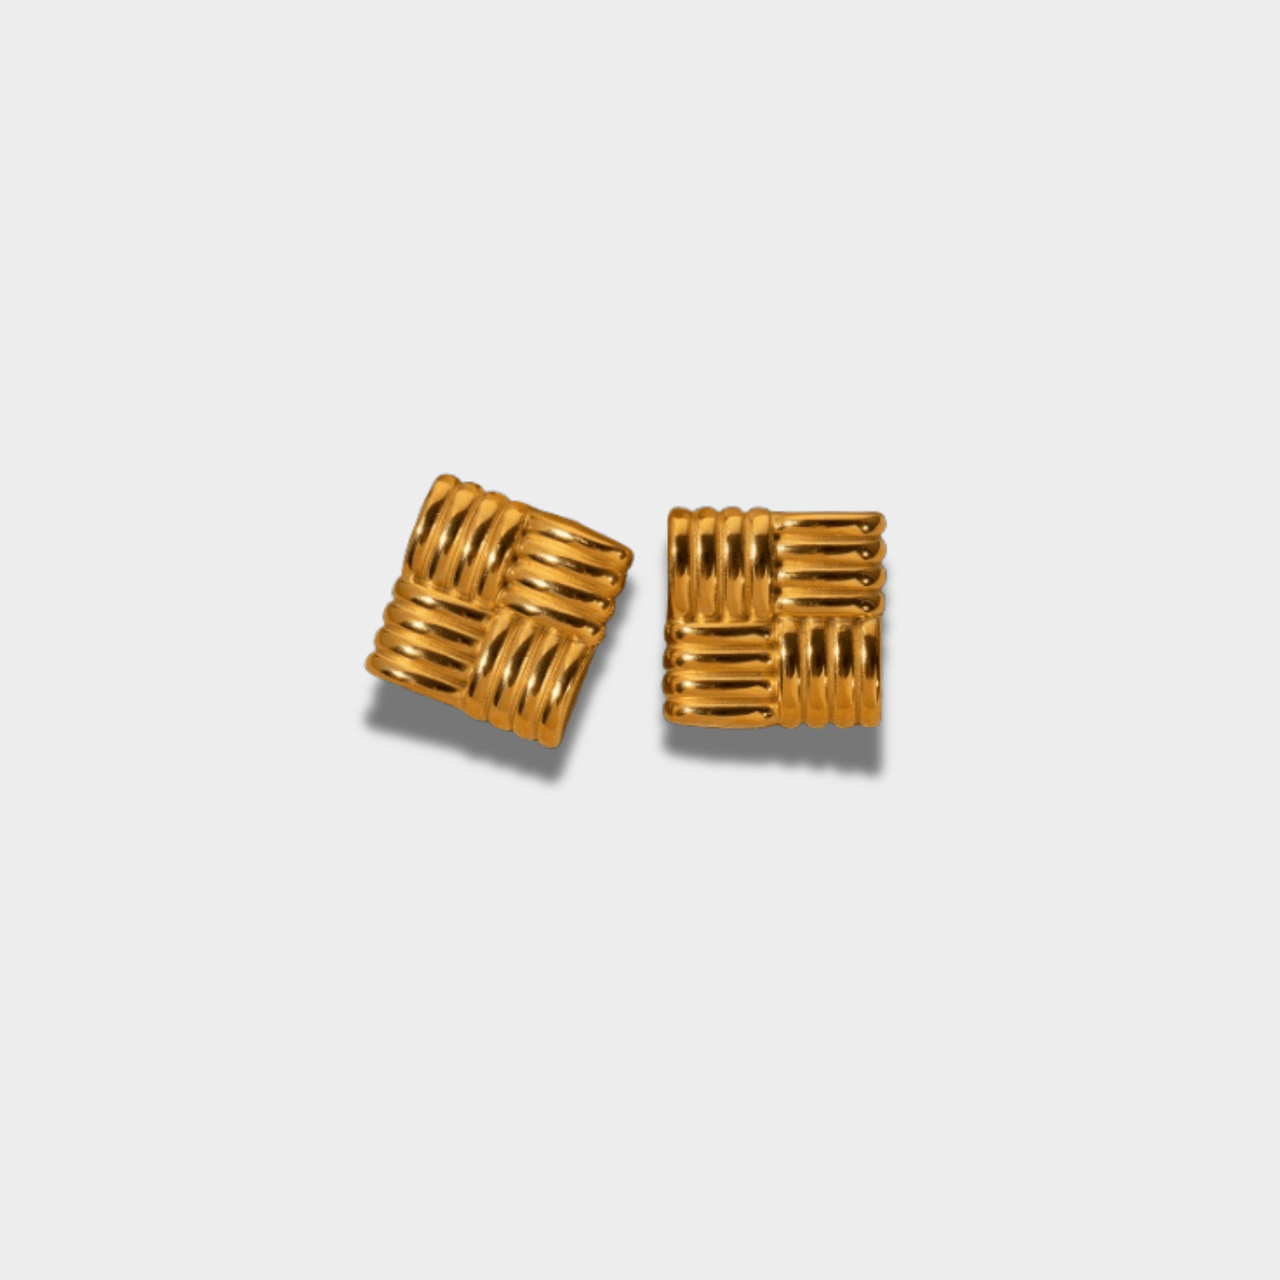 Gold Stainless Steel Square Earrings | GottaIce